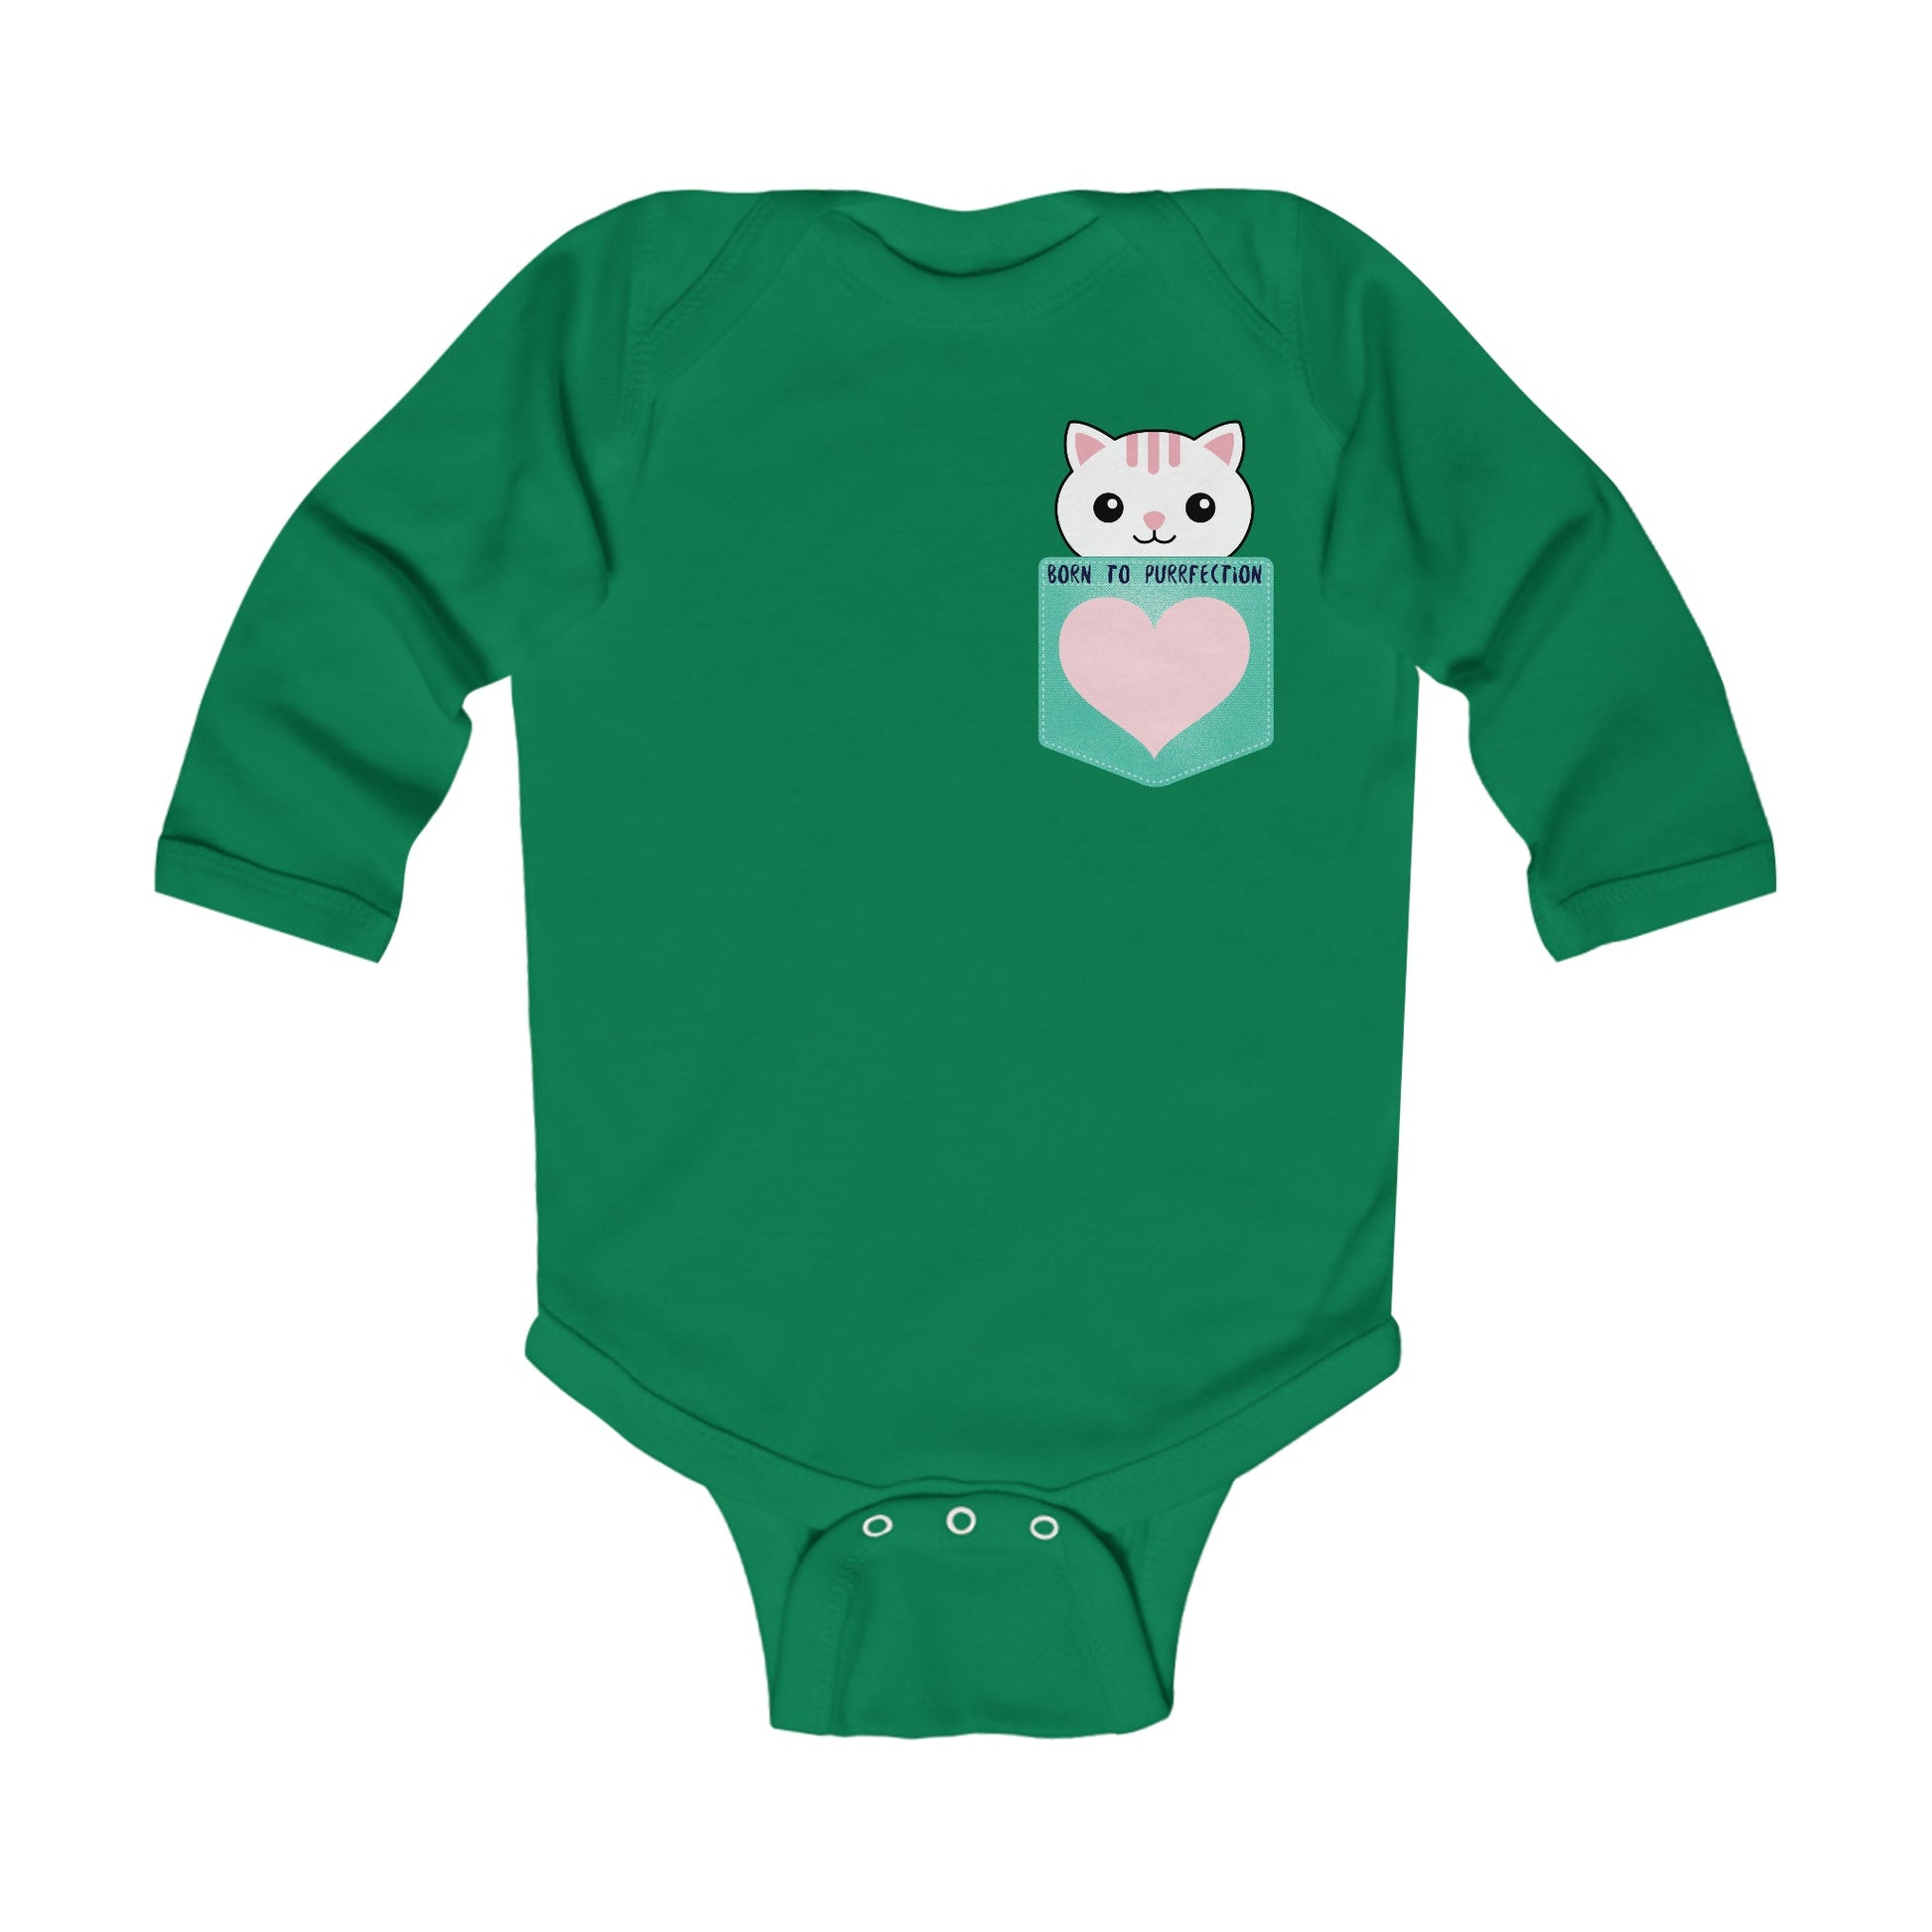 Adorable Kitty Baby Onesie Cute Cat Print Infant Romper, Cute Baby Onesie: The Perfect Gift for Baby Showers and Birthdays Catvibesbylizanne